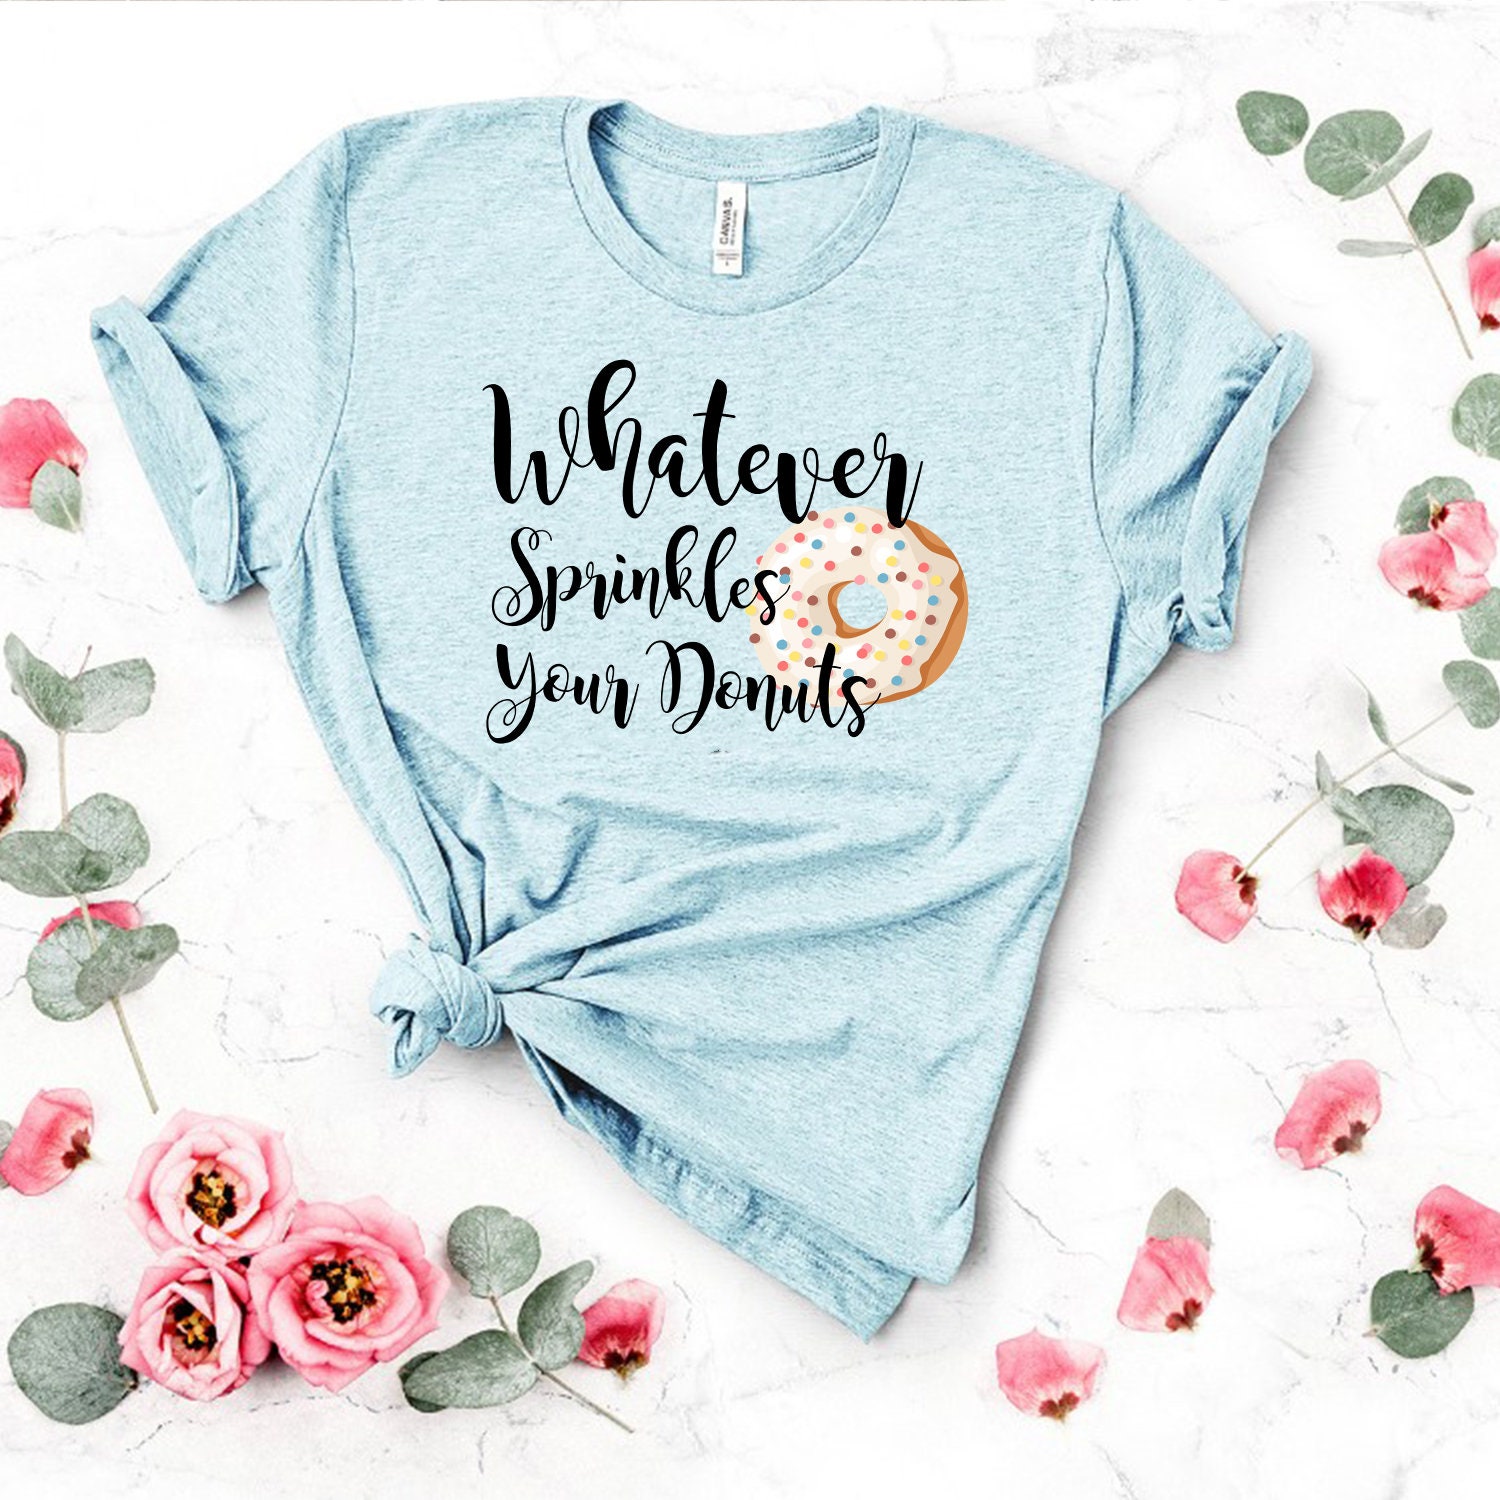 Donut Shirt What ever sprinkles you donuts Short-Sleeve | Etsy